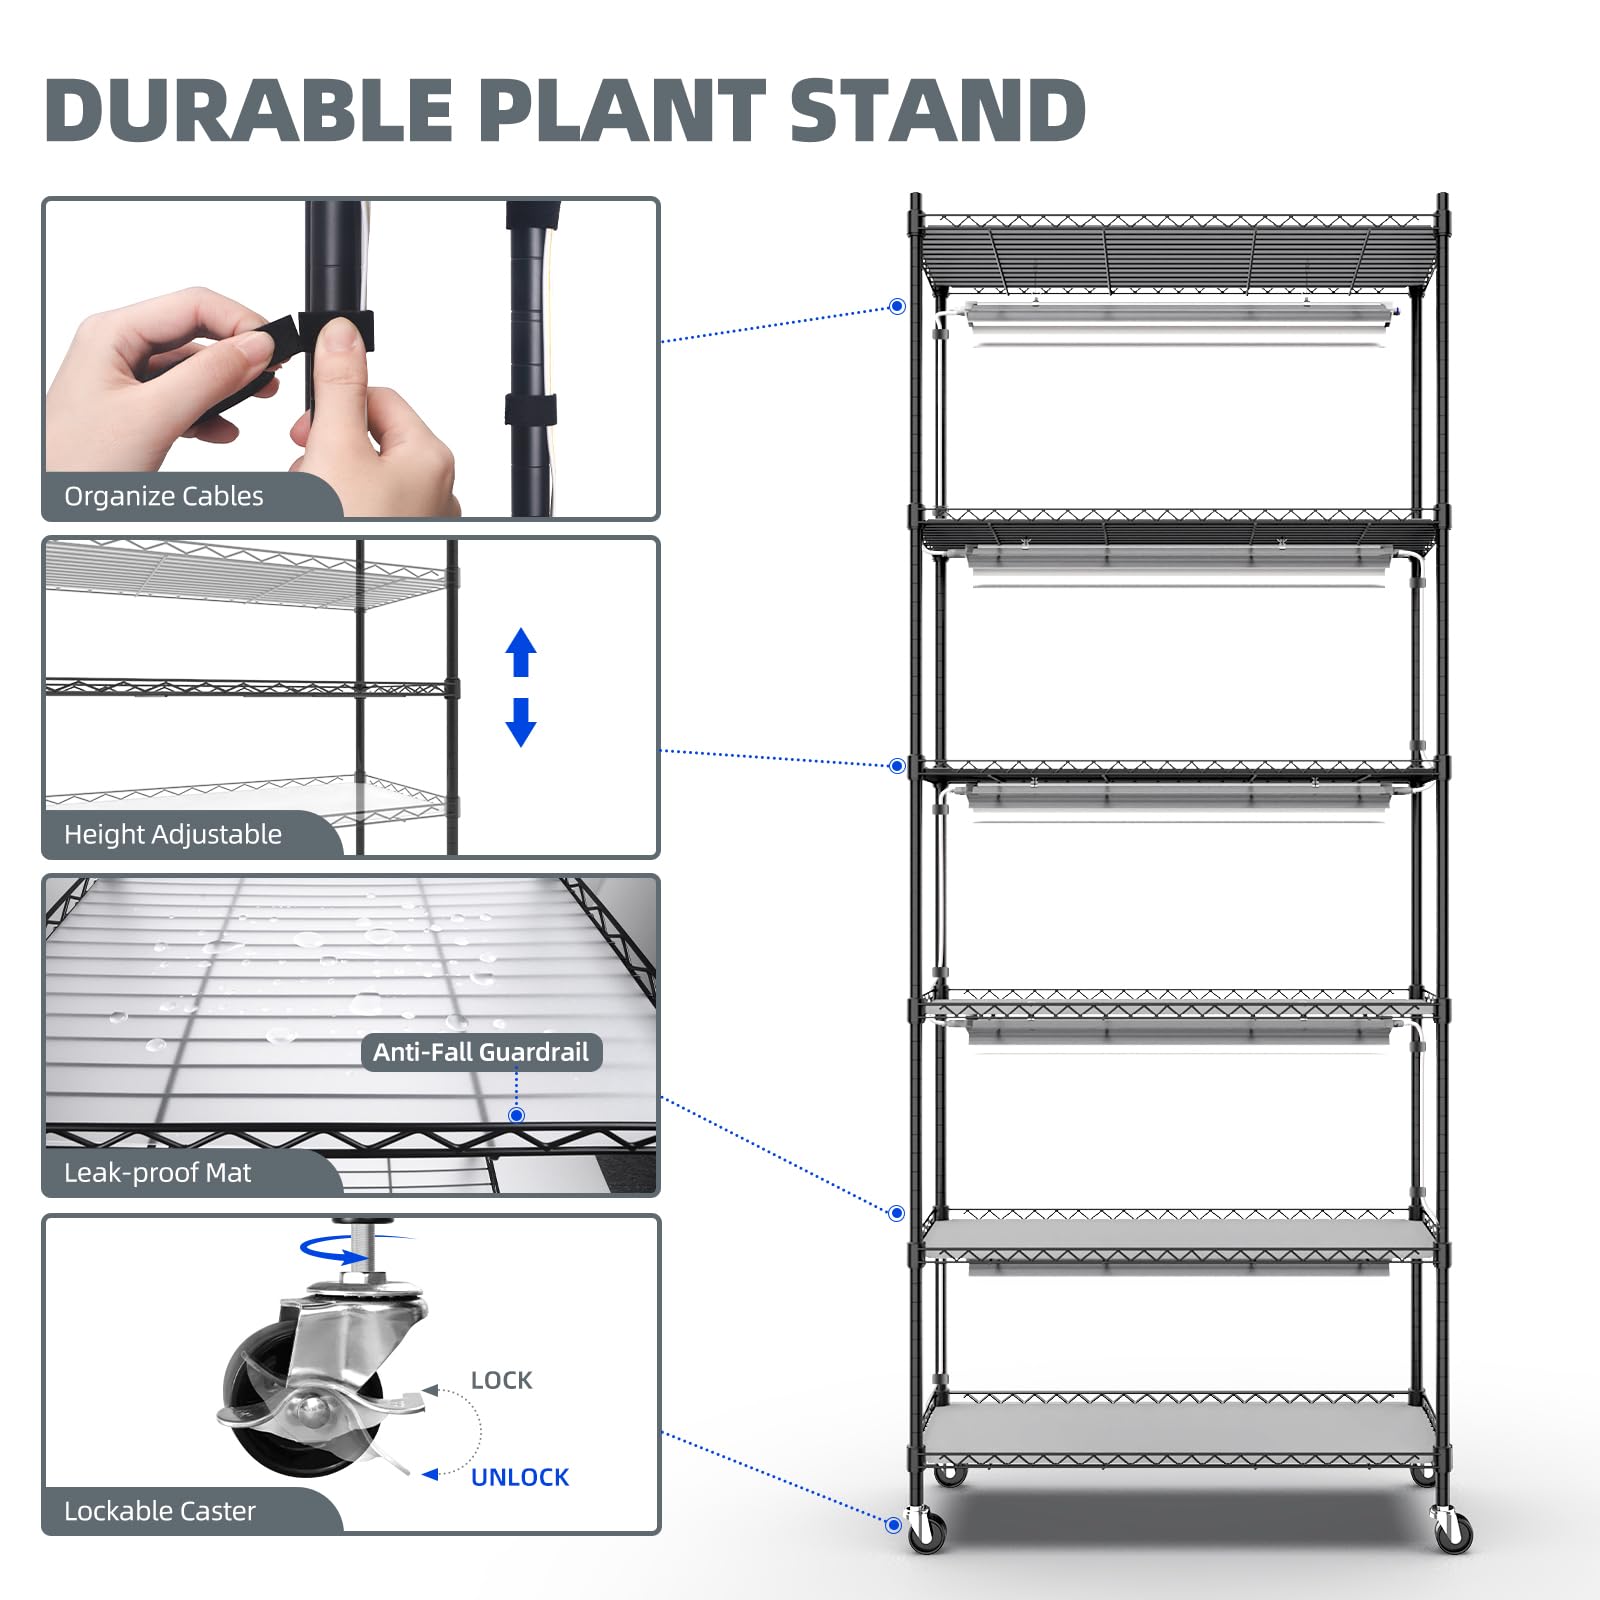 6-Tier Plant Stand with 2020T LED Grow Lights,29.5x13.8x71IN,30W,Full Spectrum,5 lights,CJ30GCR